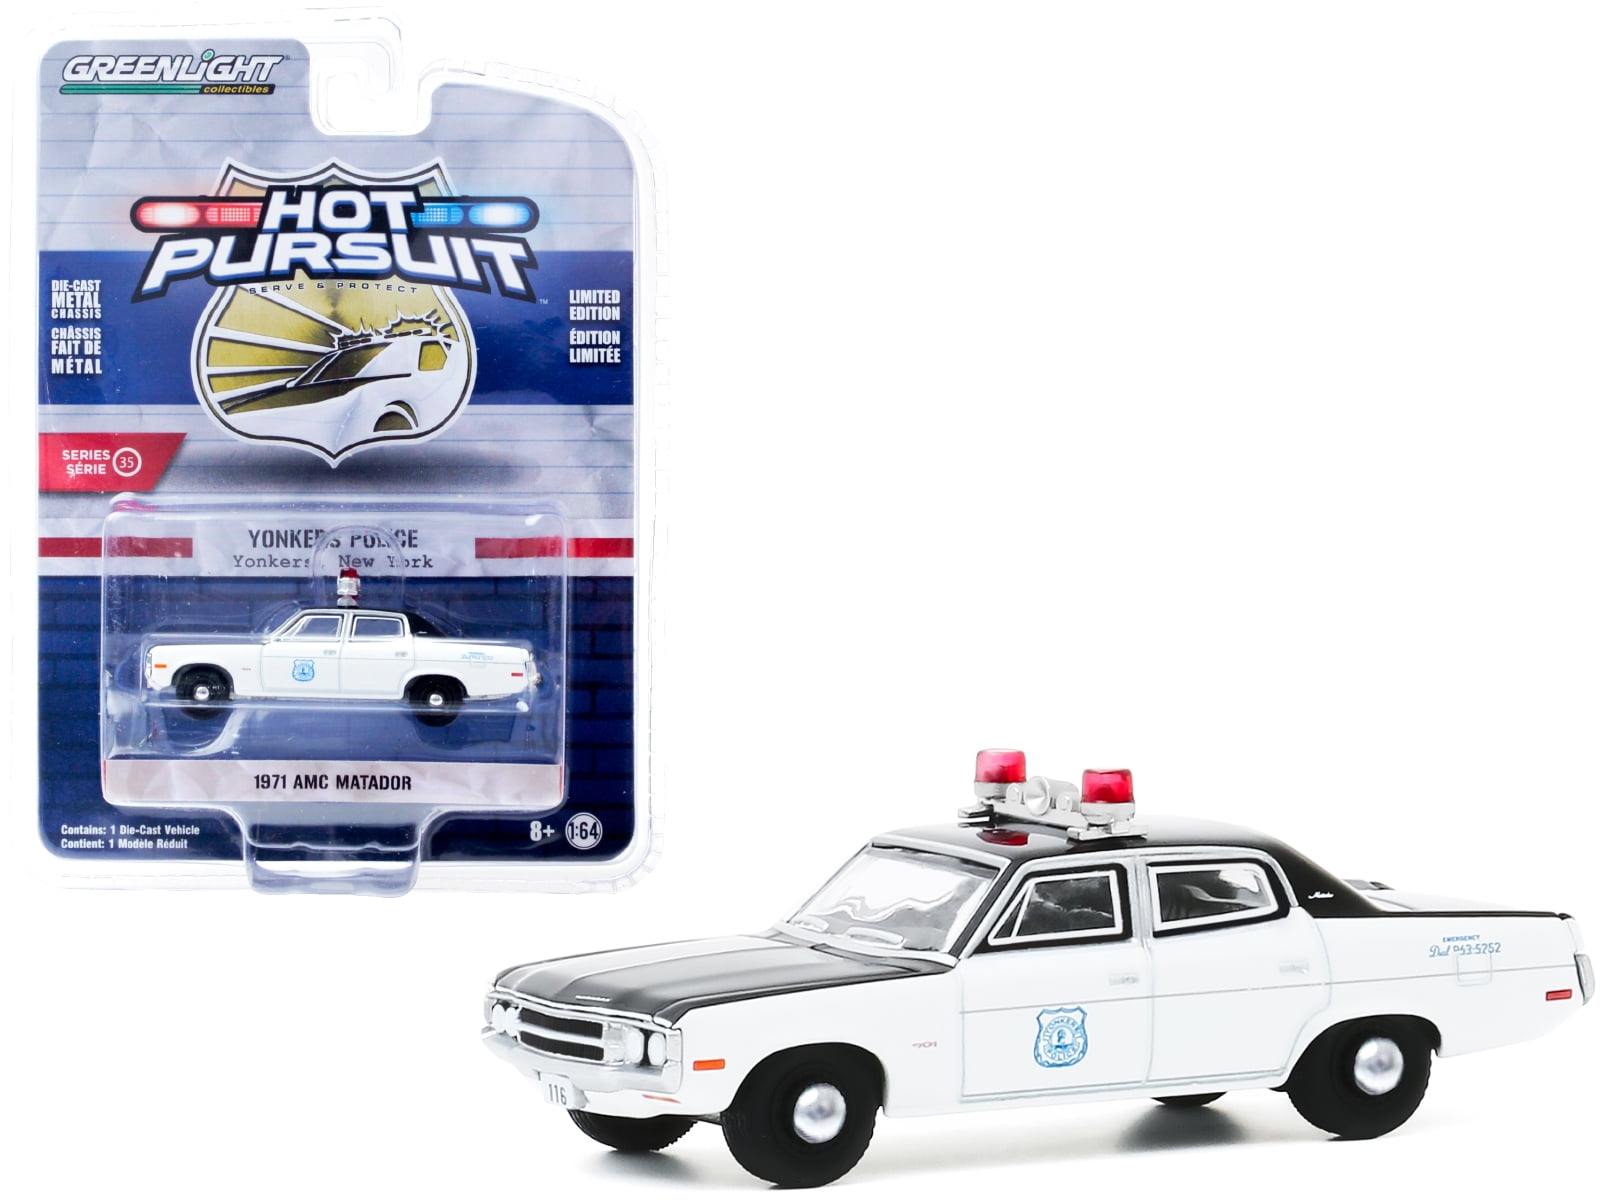 A.S.S NEU GreenLight 1/64 Ford Police Interceptor Utility NYPD Hot Pursuit 35 